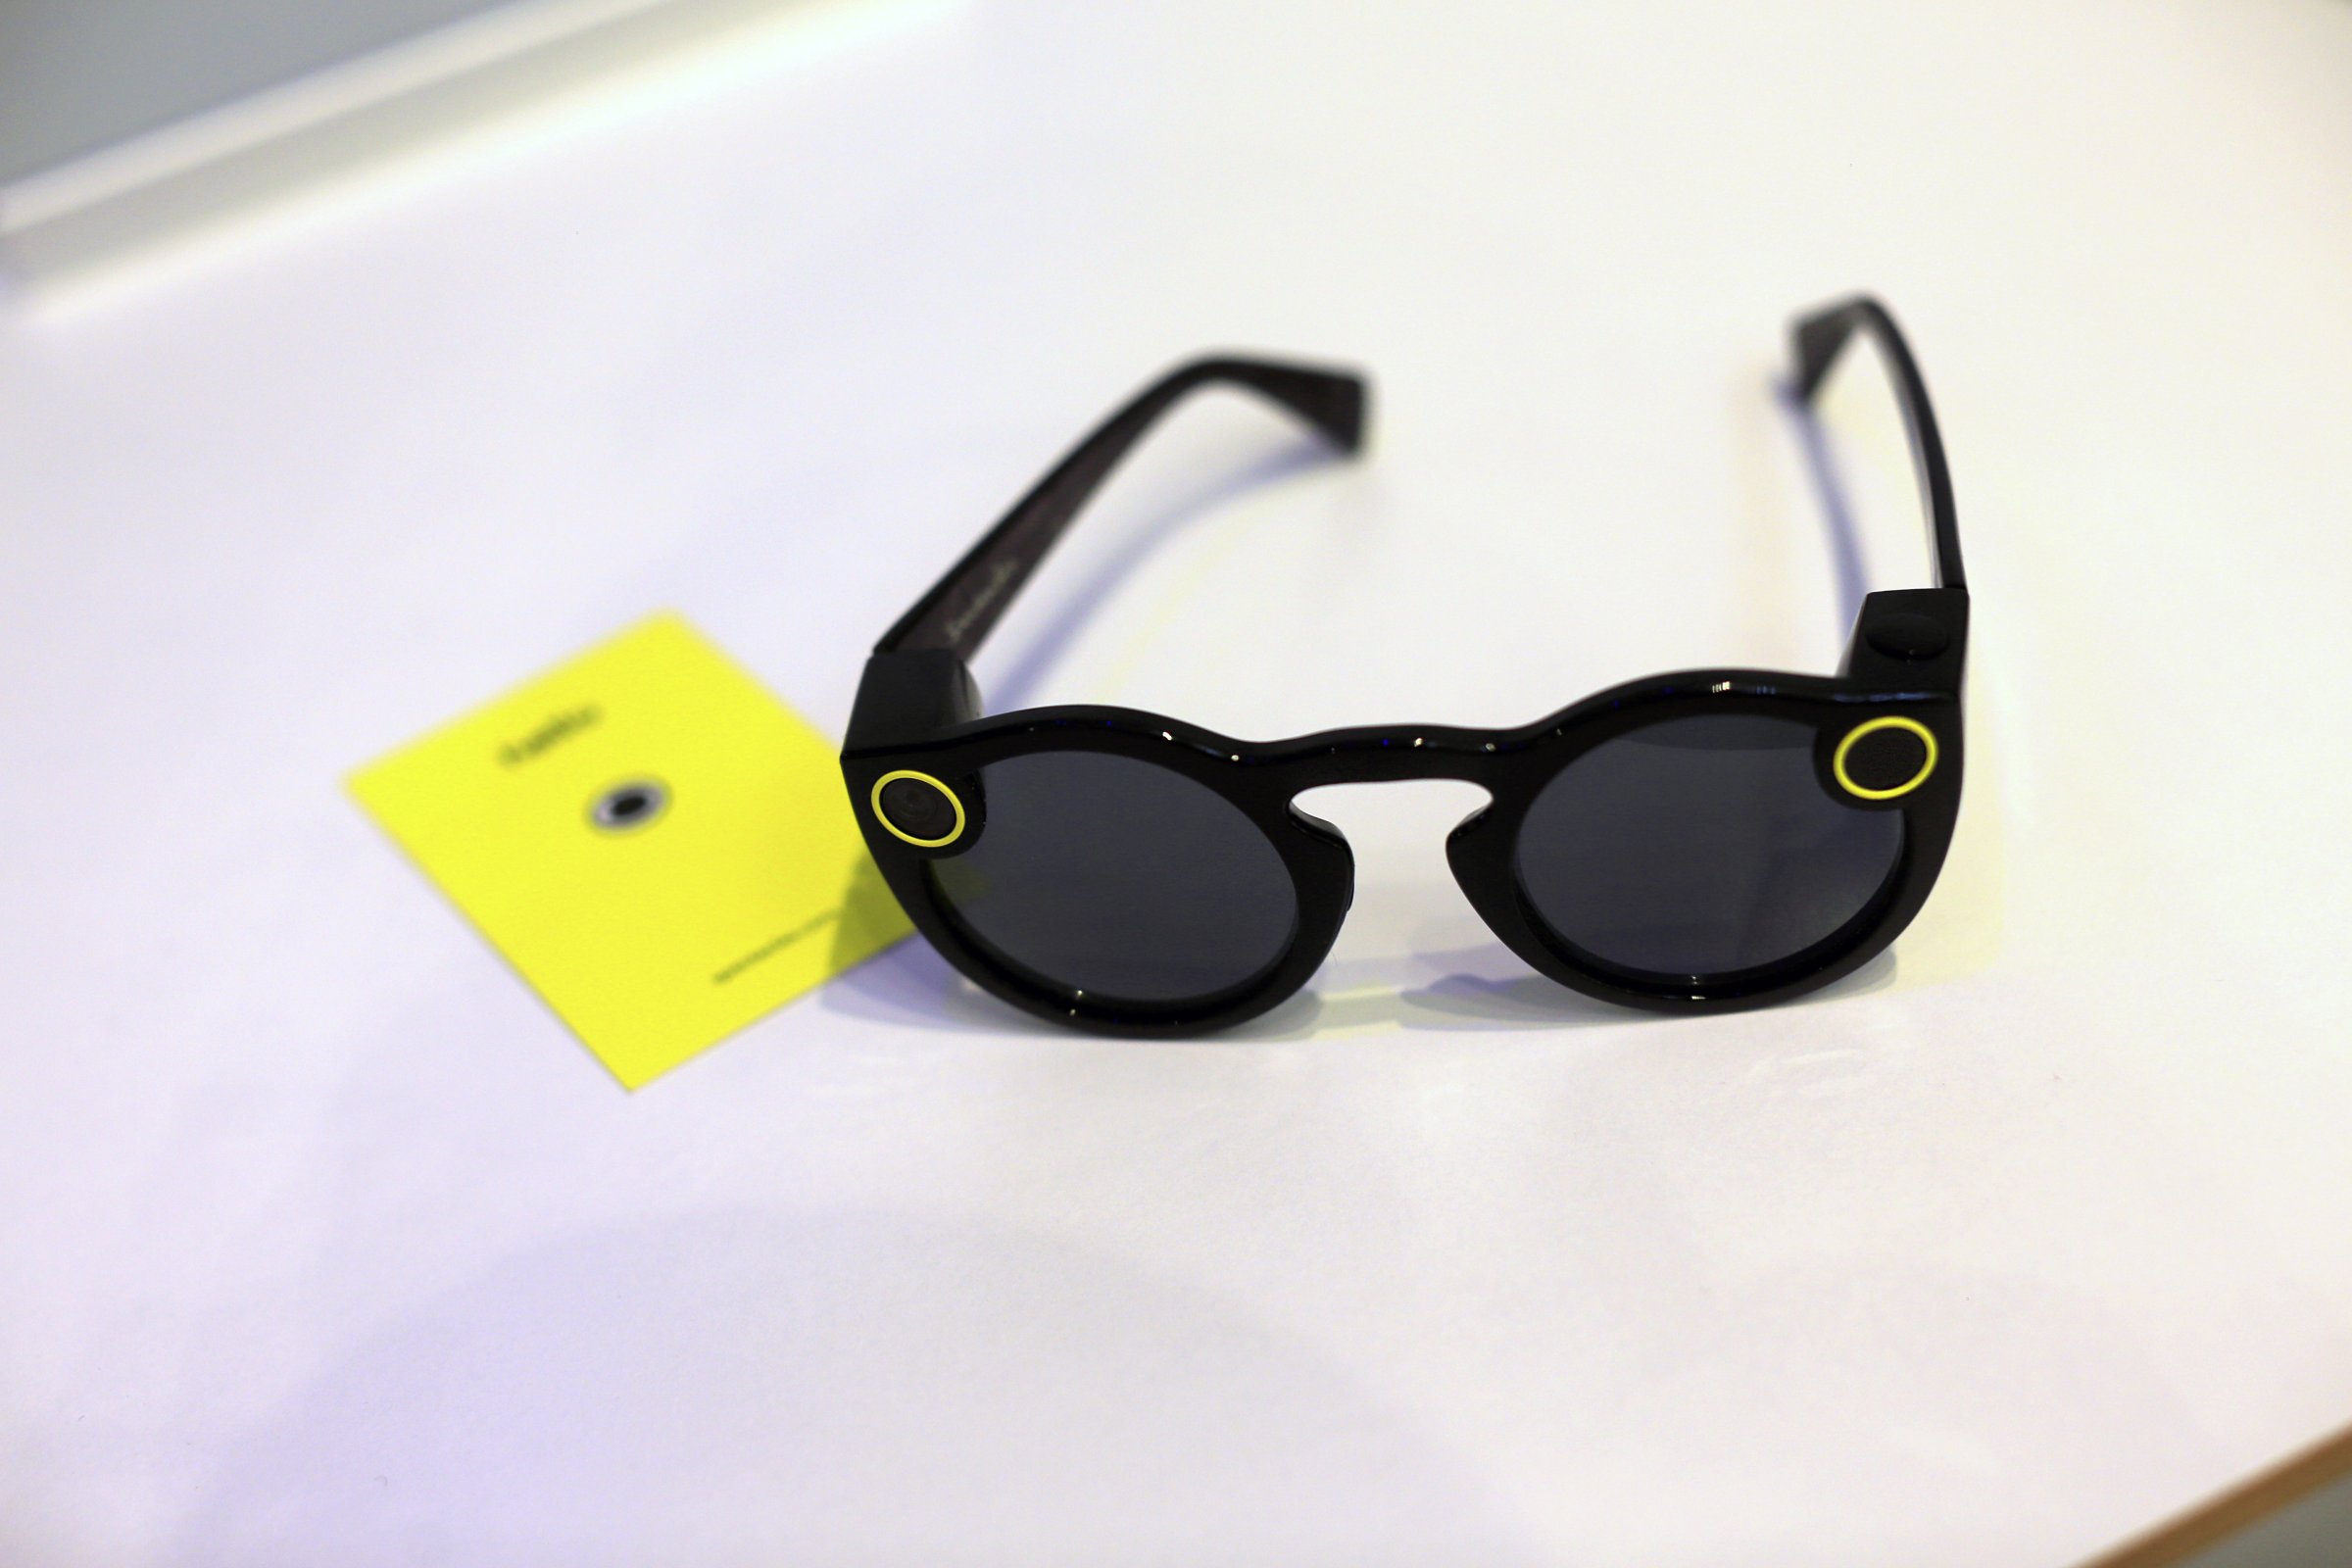 Inside Snap Inc. Pop-Up Store As Holiday Shoppers Buy Snapchat Spectacles